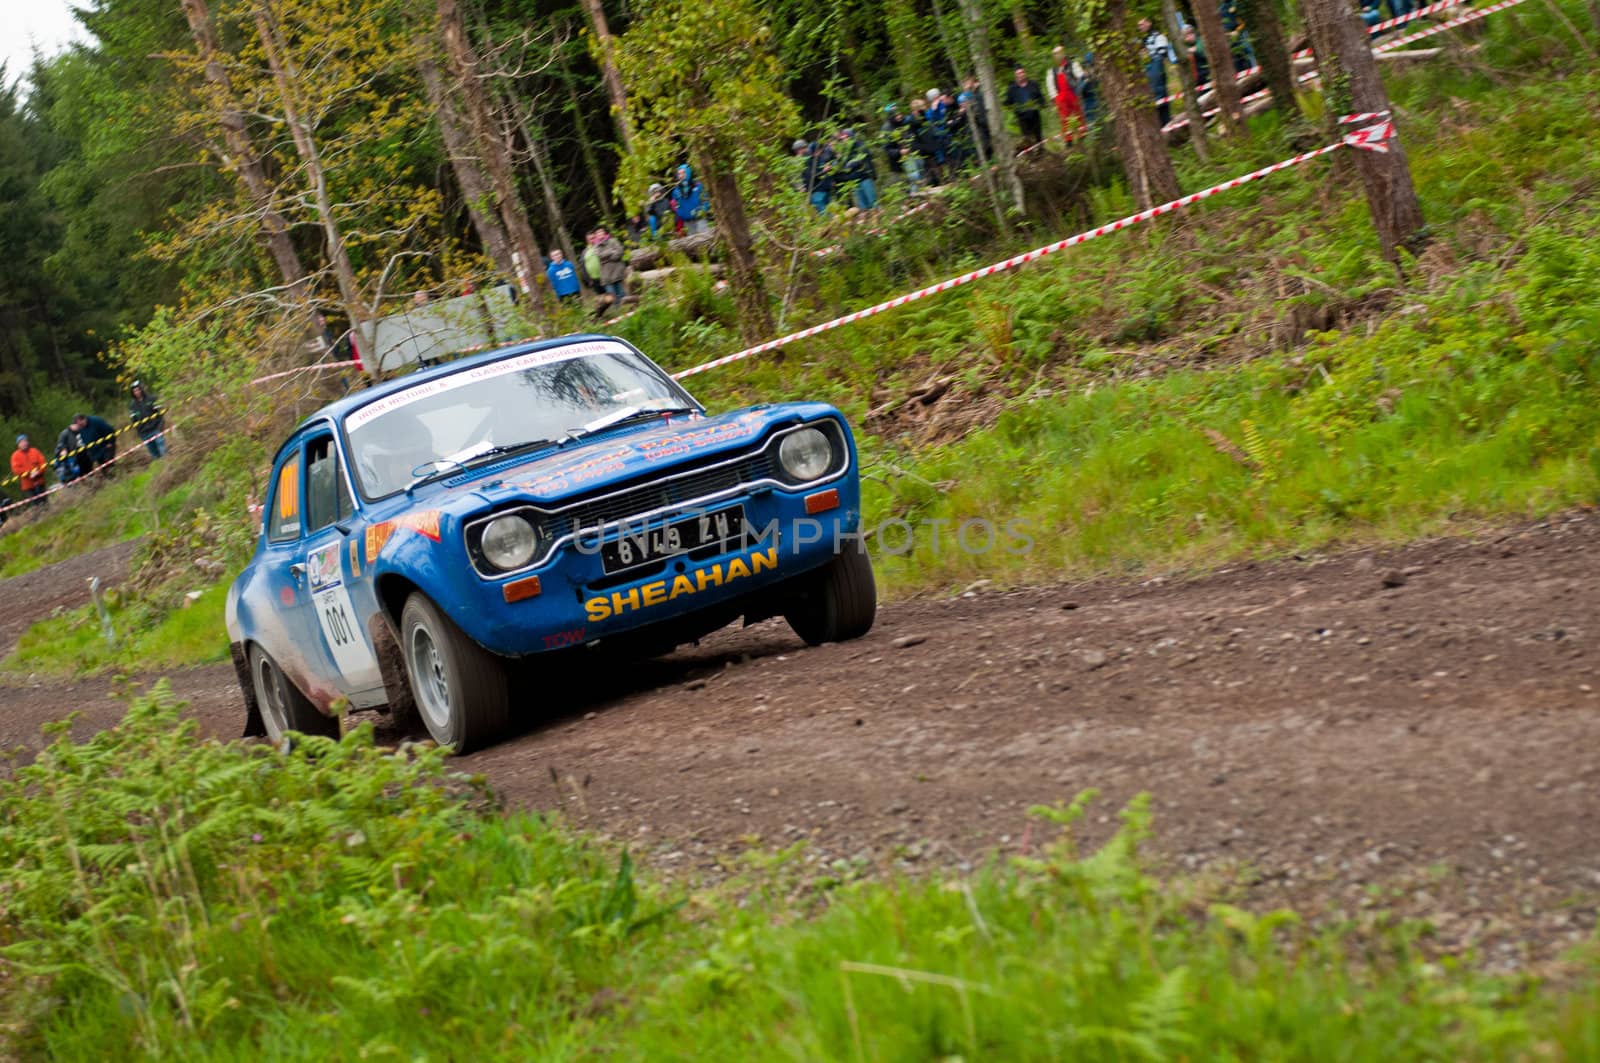 MALLOW, IRELAND - MAY 19: M. Sheahan driving Ford Escort at the Jim Walsh Cork Forest Rally on May 19, 2012 in Mallow, Ireland. 4th round of the Valvoline National Forest Rally Championship.